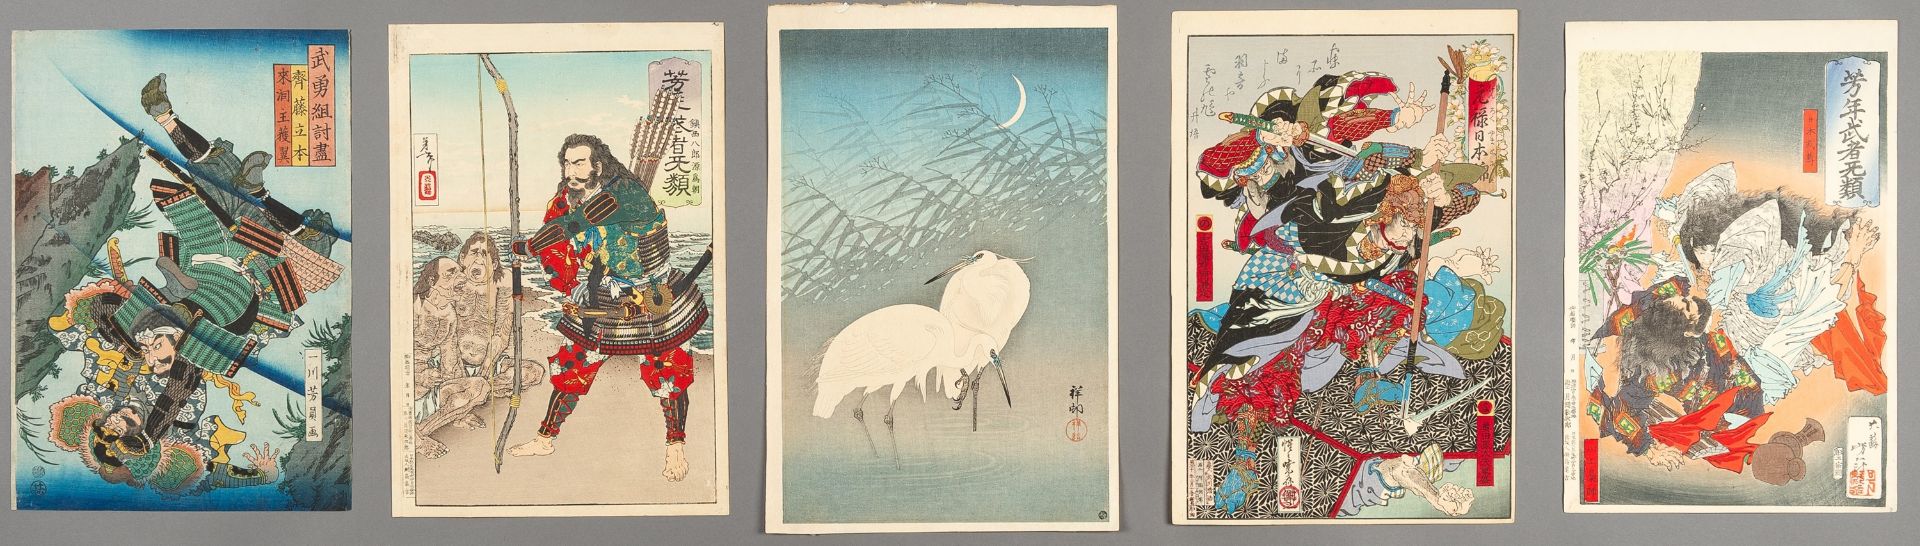 A GROUP OF FIVE ORIGINAL COLOR WOODBLOCK PRINTS, 19TH CENTURY